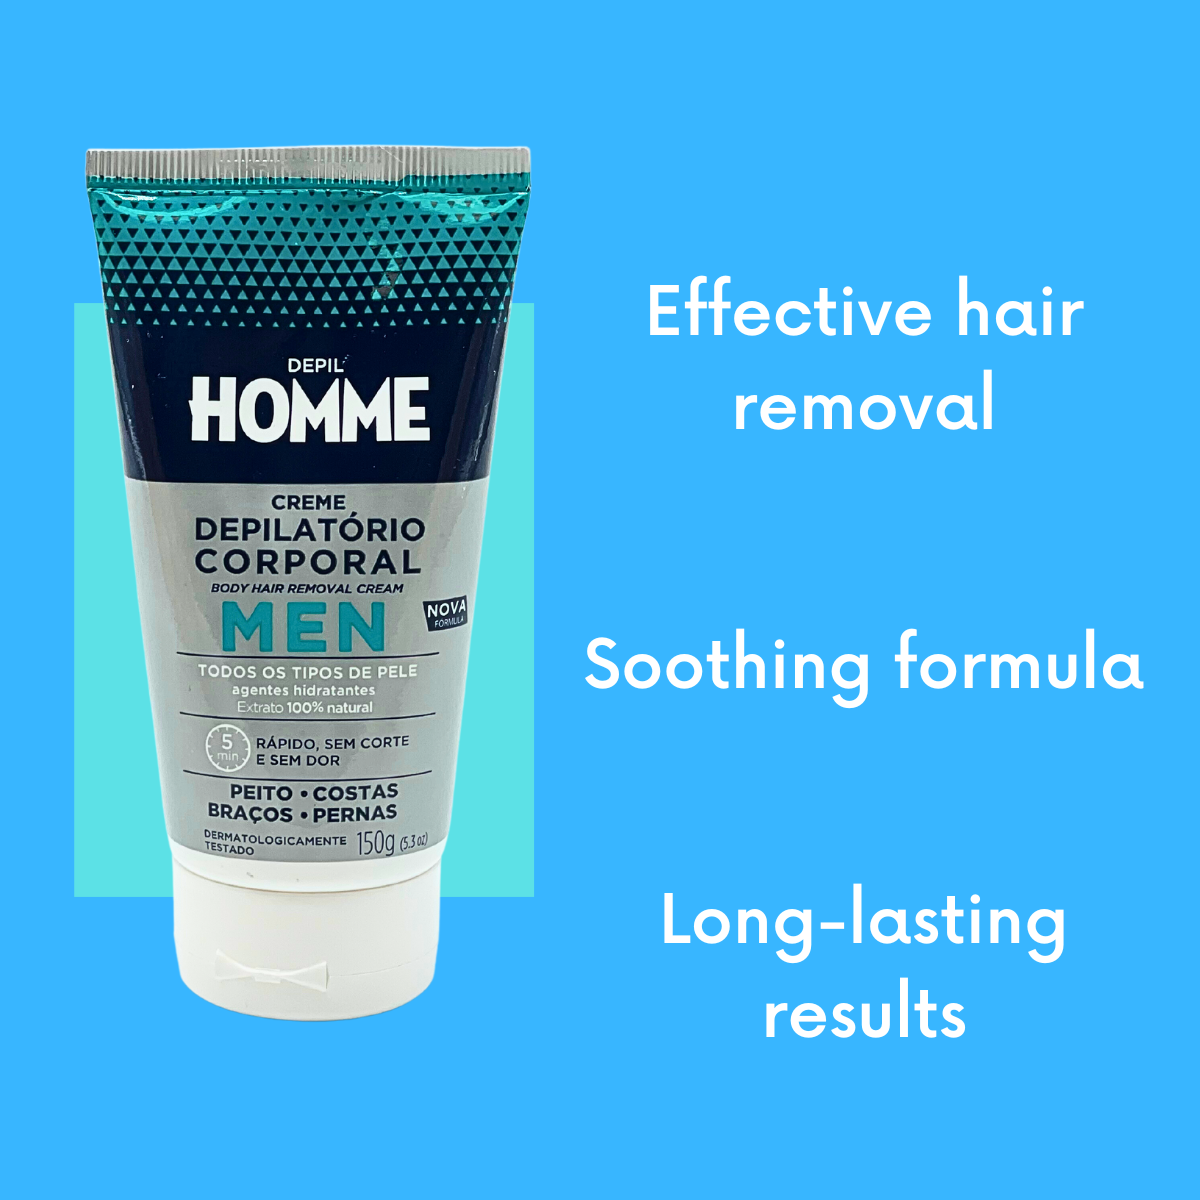 Depil HOMME Hair Removal Body Cream, Soothing Depilatory Cream, 150 g (3 Pack) - Buy professional cosmetics dedicated to hair removal